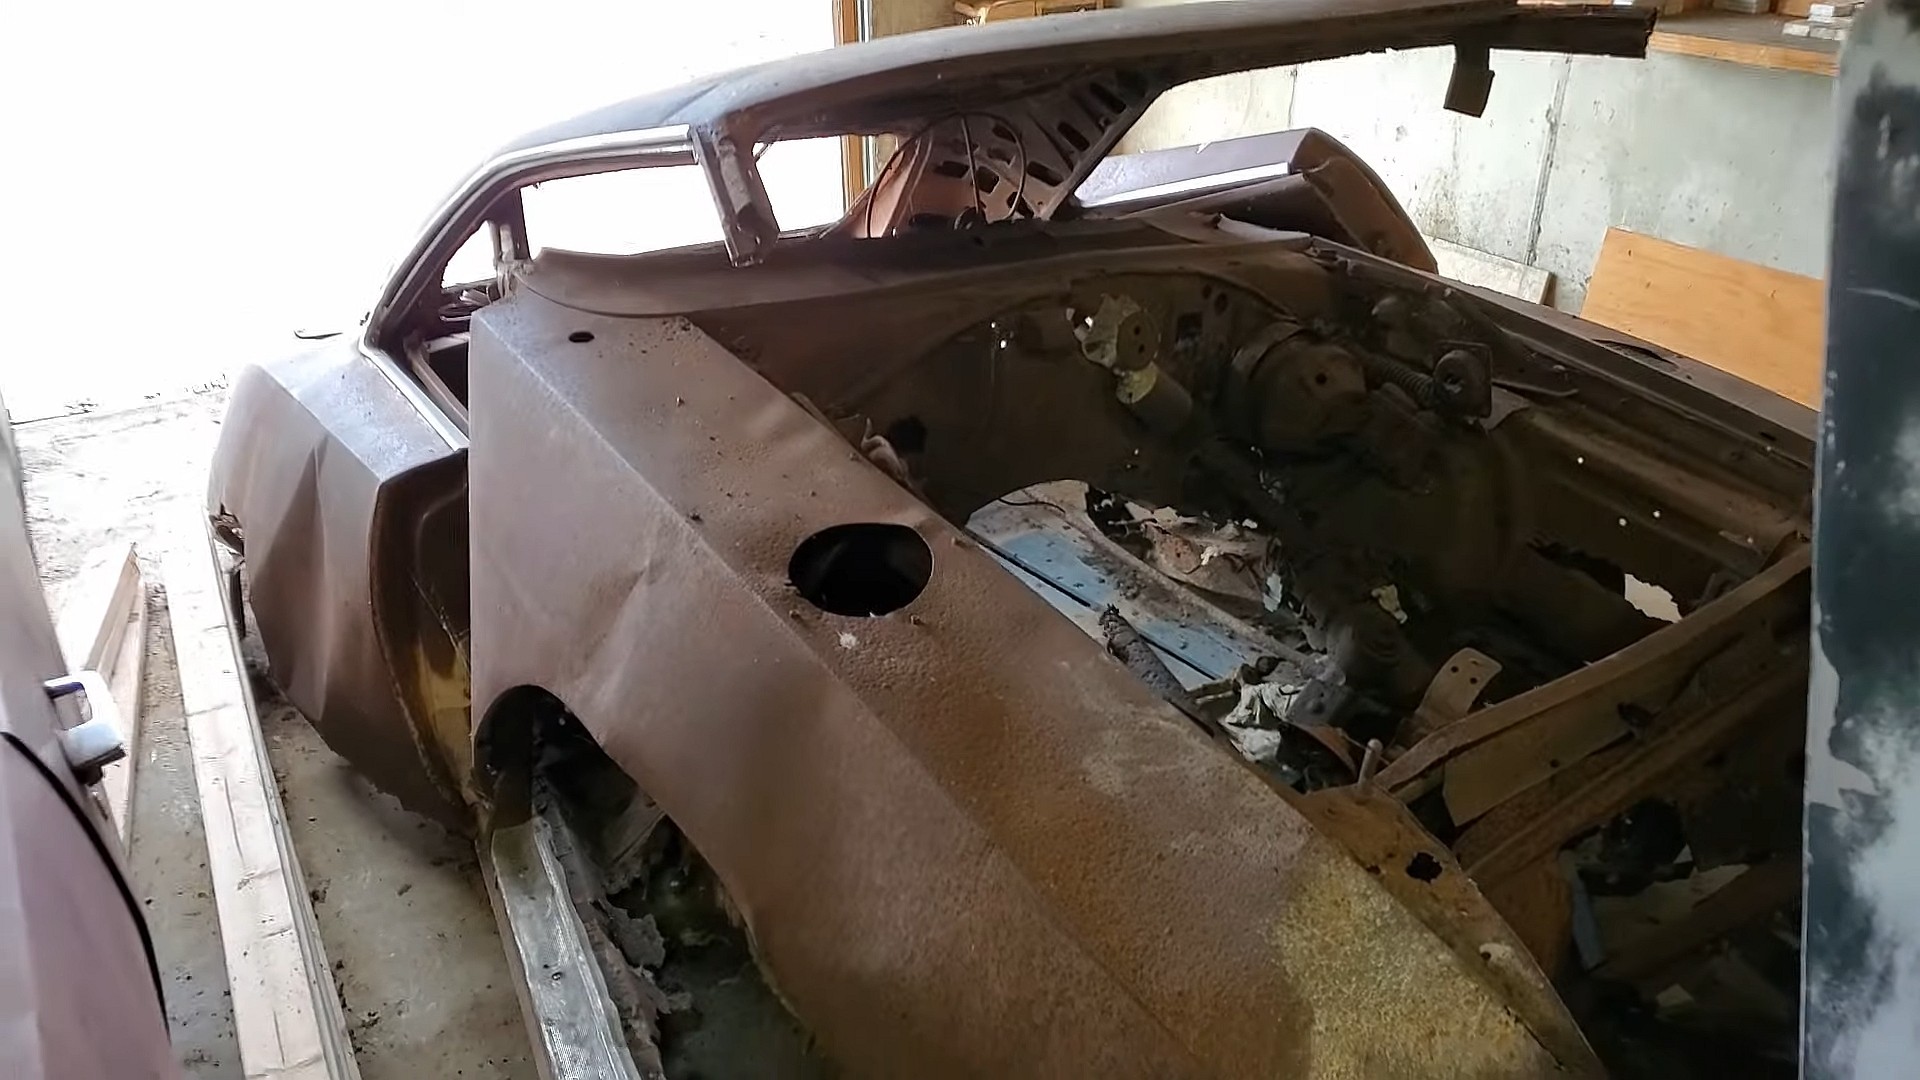 Mysterious 1969 Dodge Charger Daytona Spent Decades in Storage